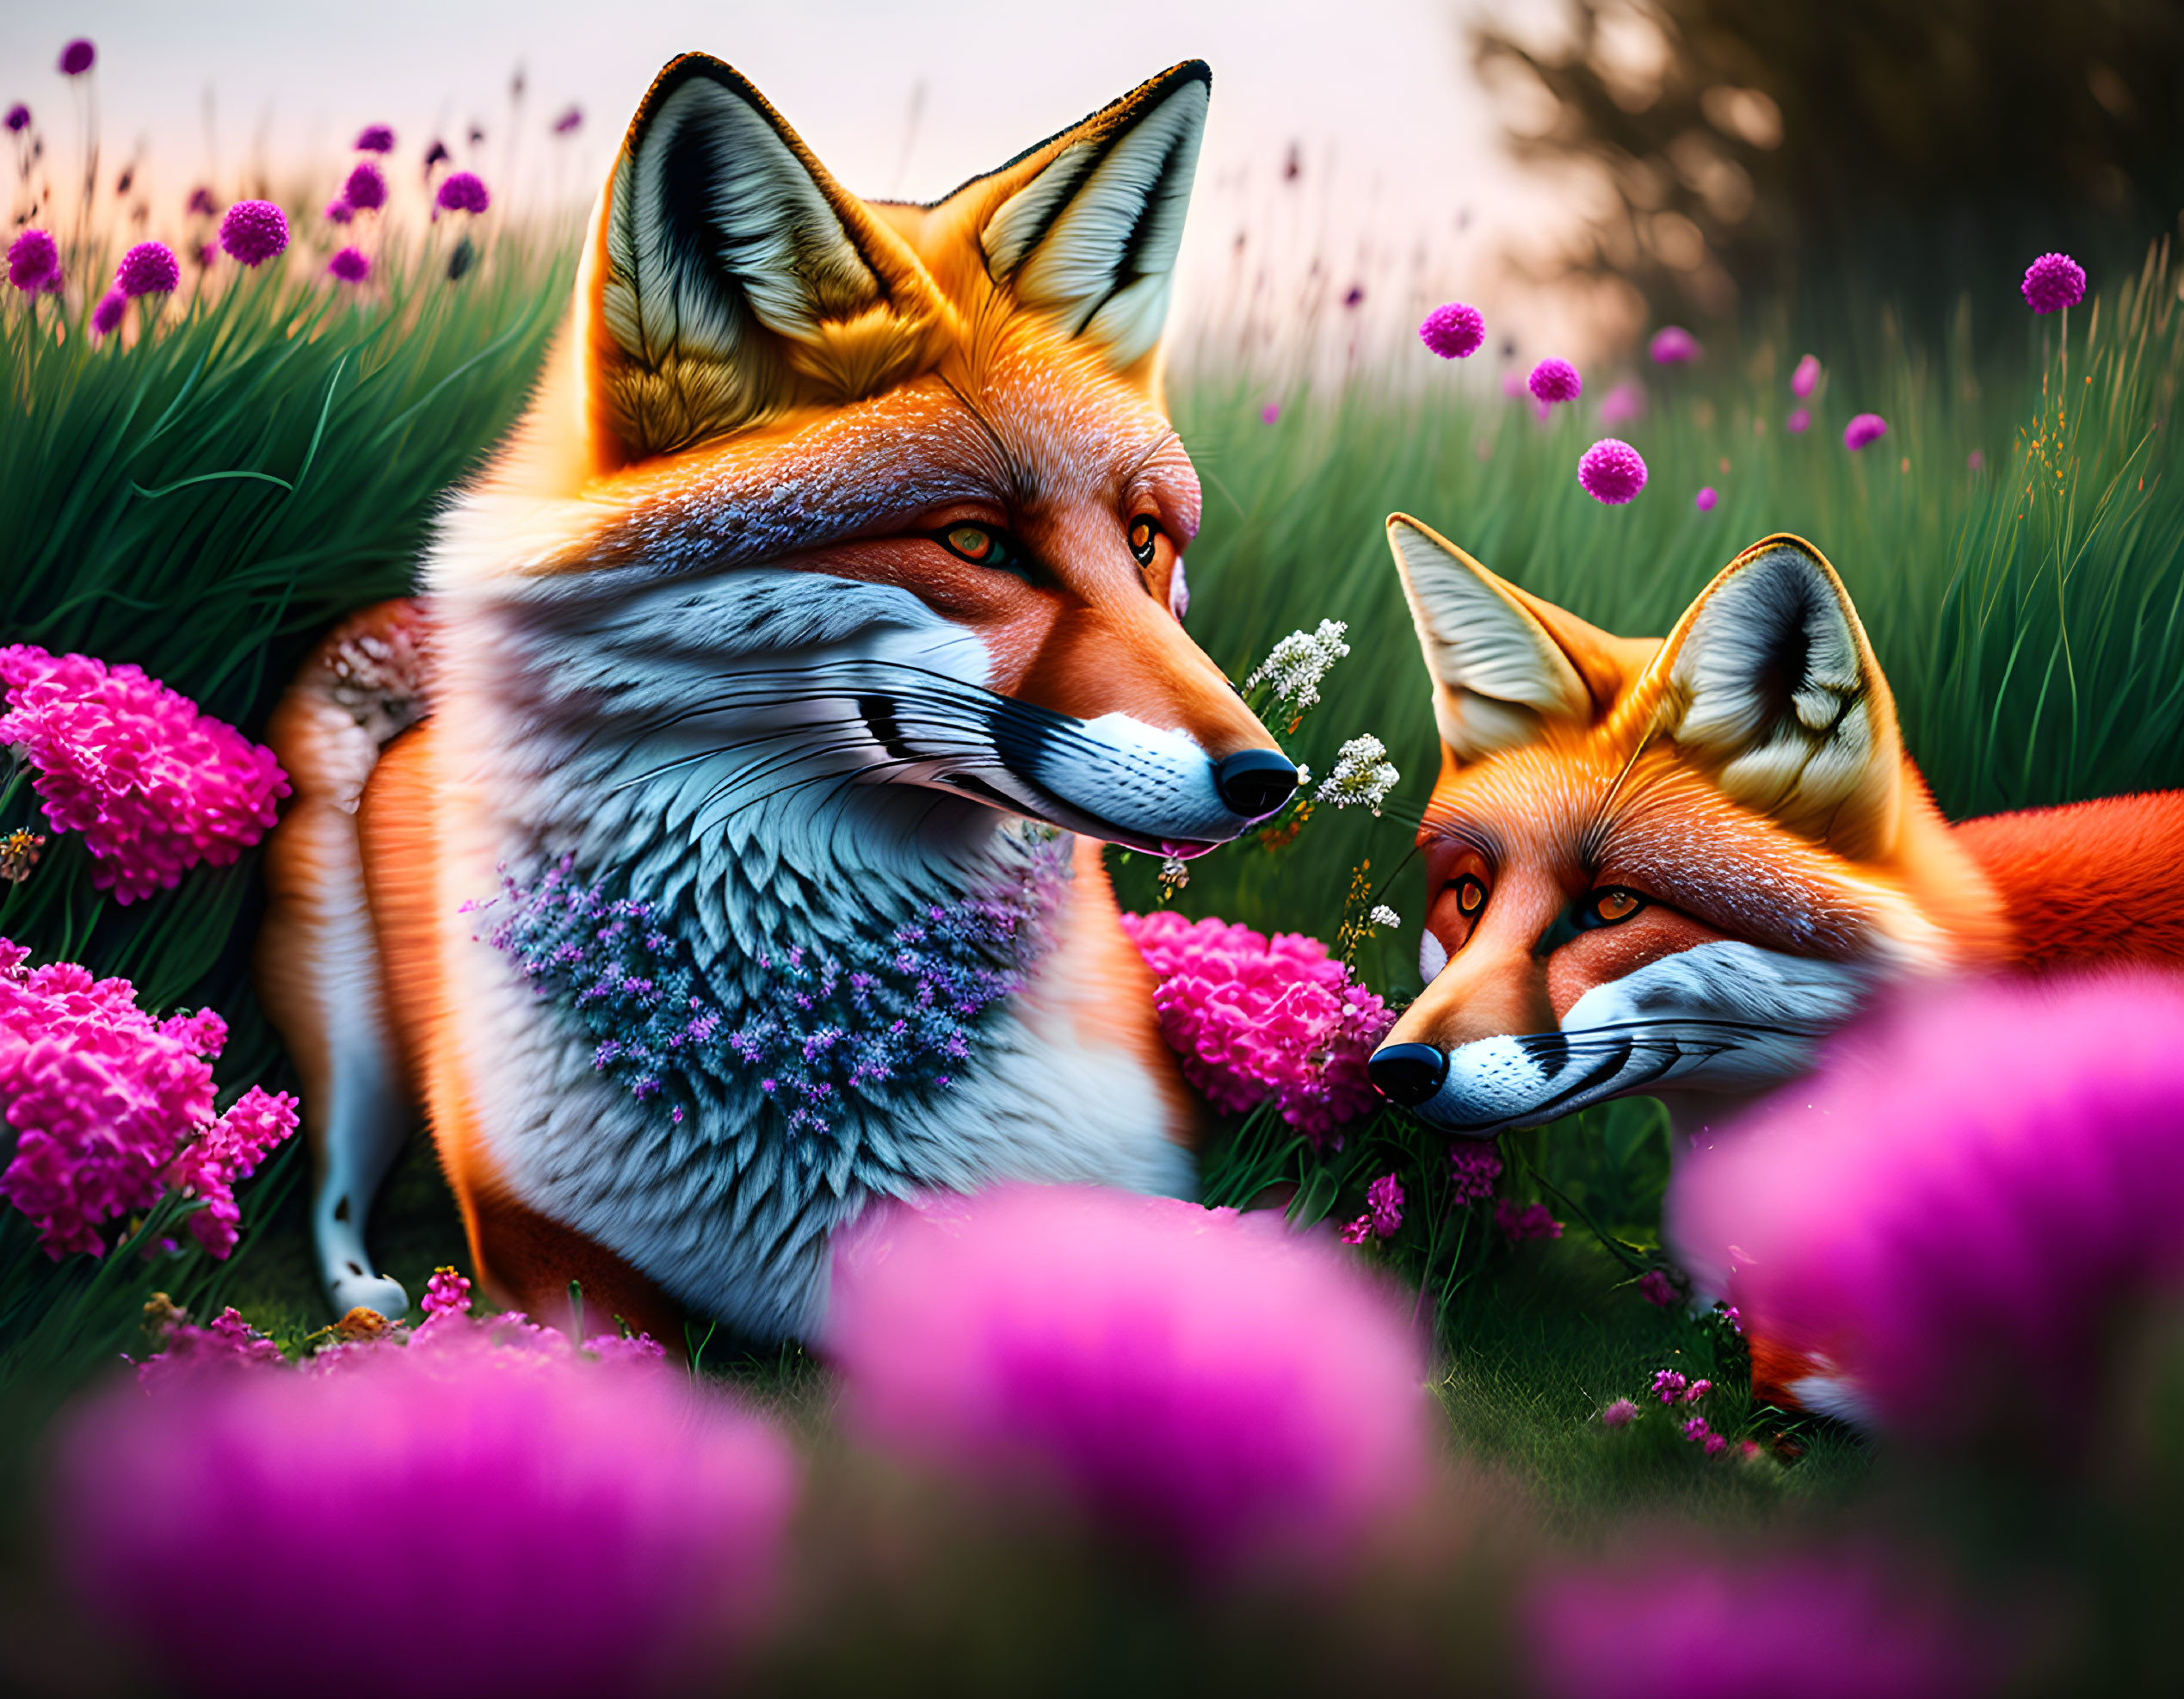 Detailed Anthropomorphized Foxes in Vibrant Floral Field